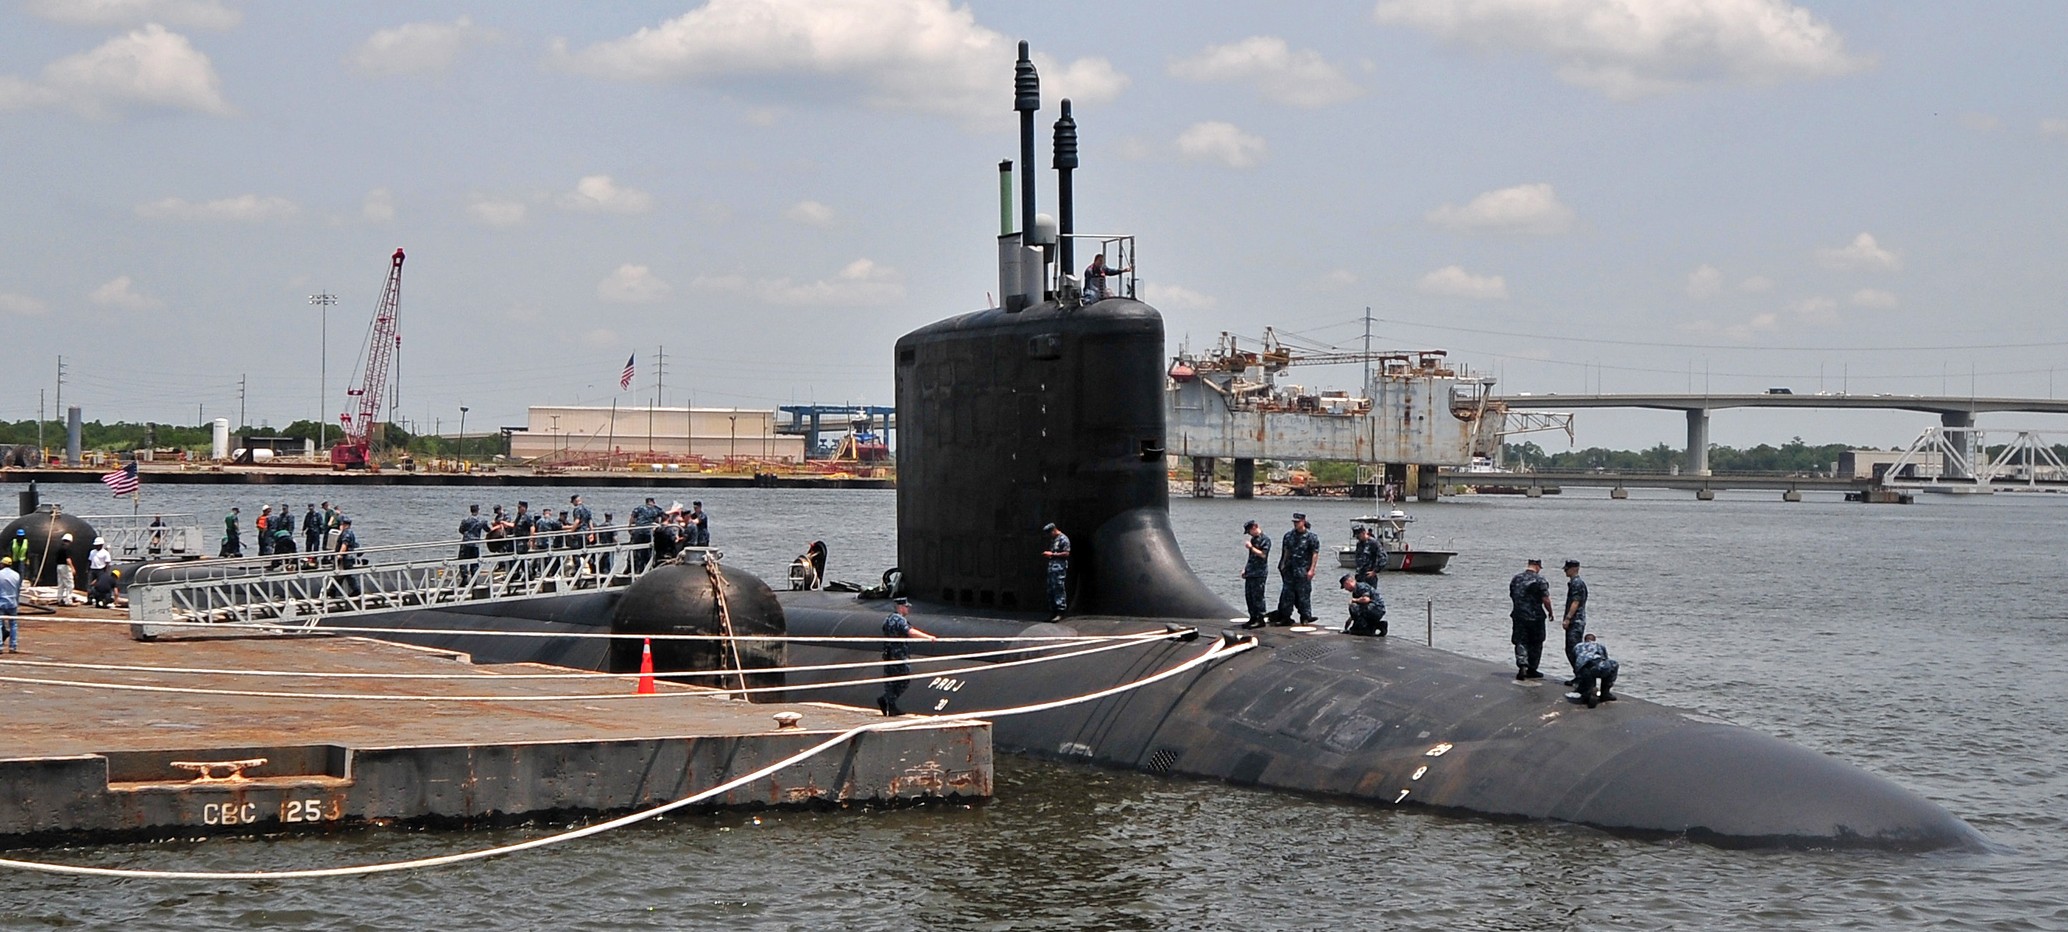 ssn-782 uss mississippi virginia class attack submarine us navy 26 pascagoula